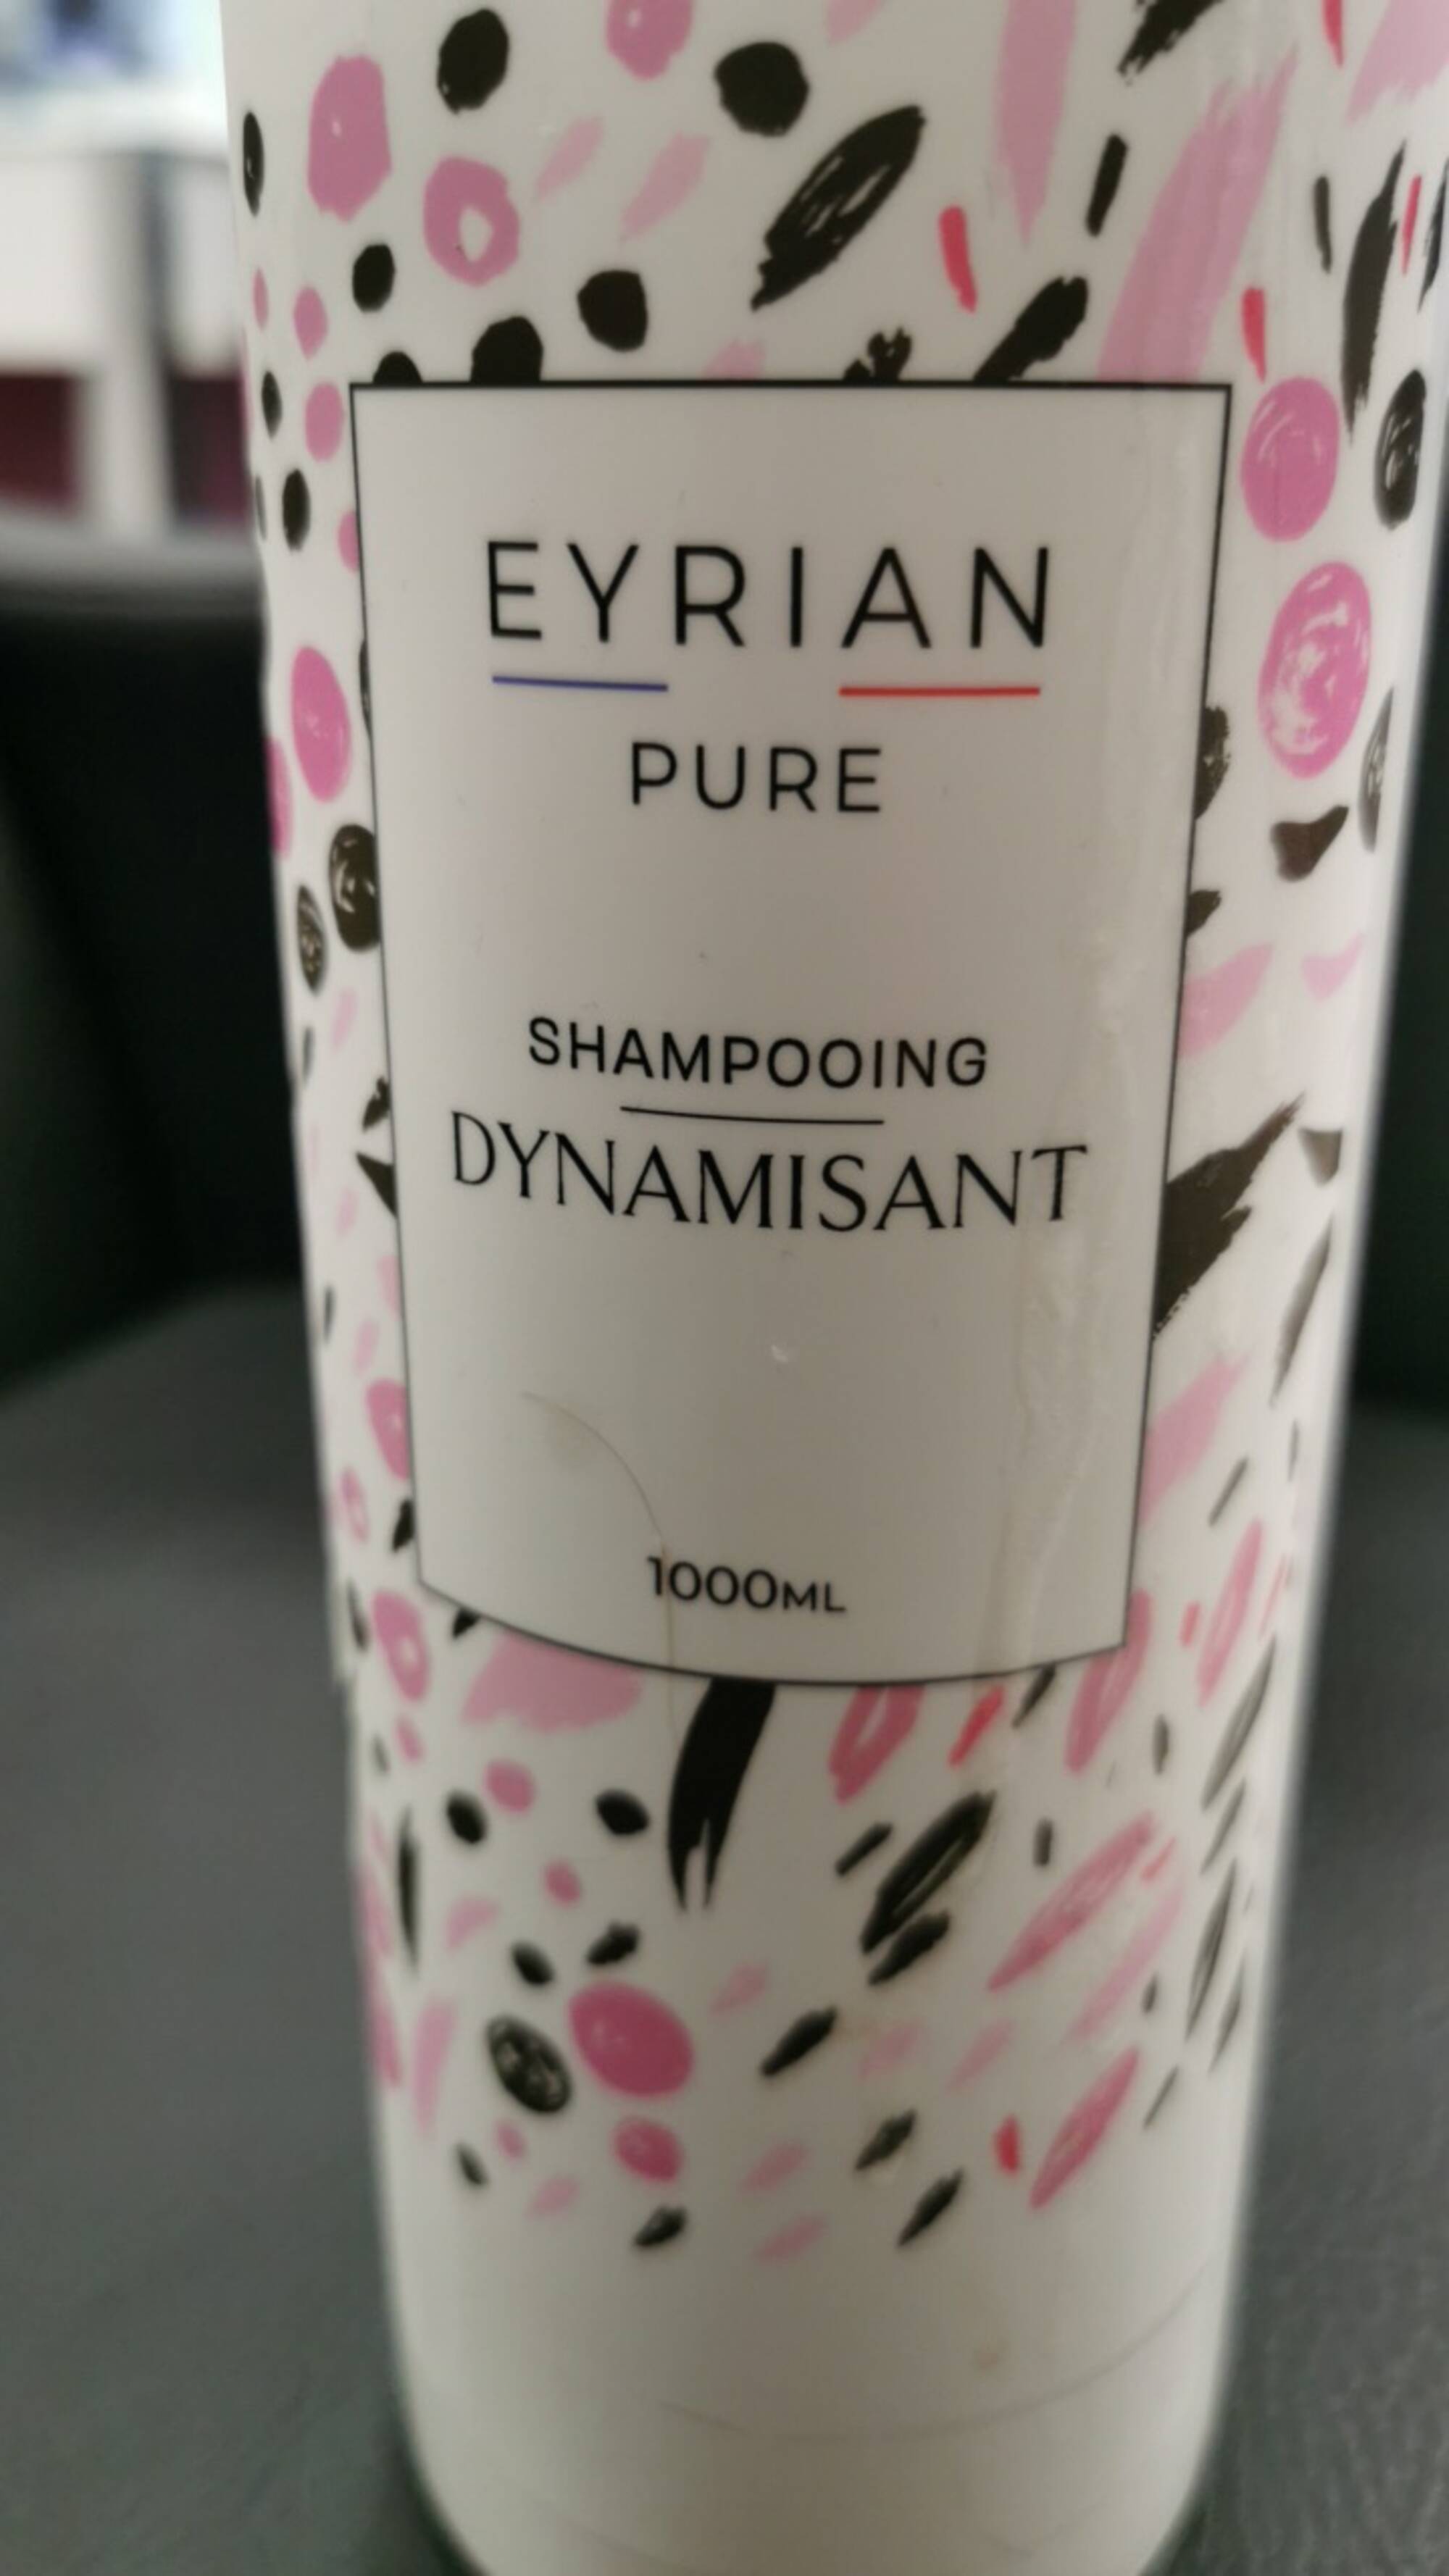 EYRIAN PURE - Shampooing Dynamisant